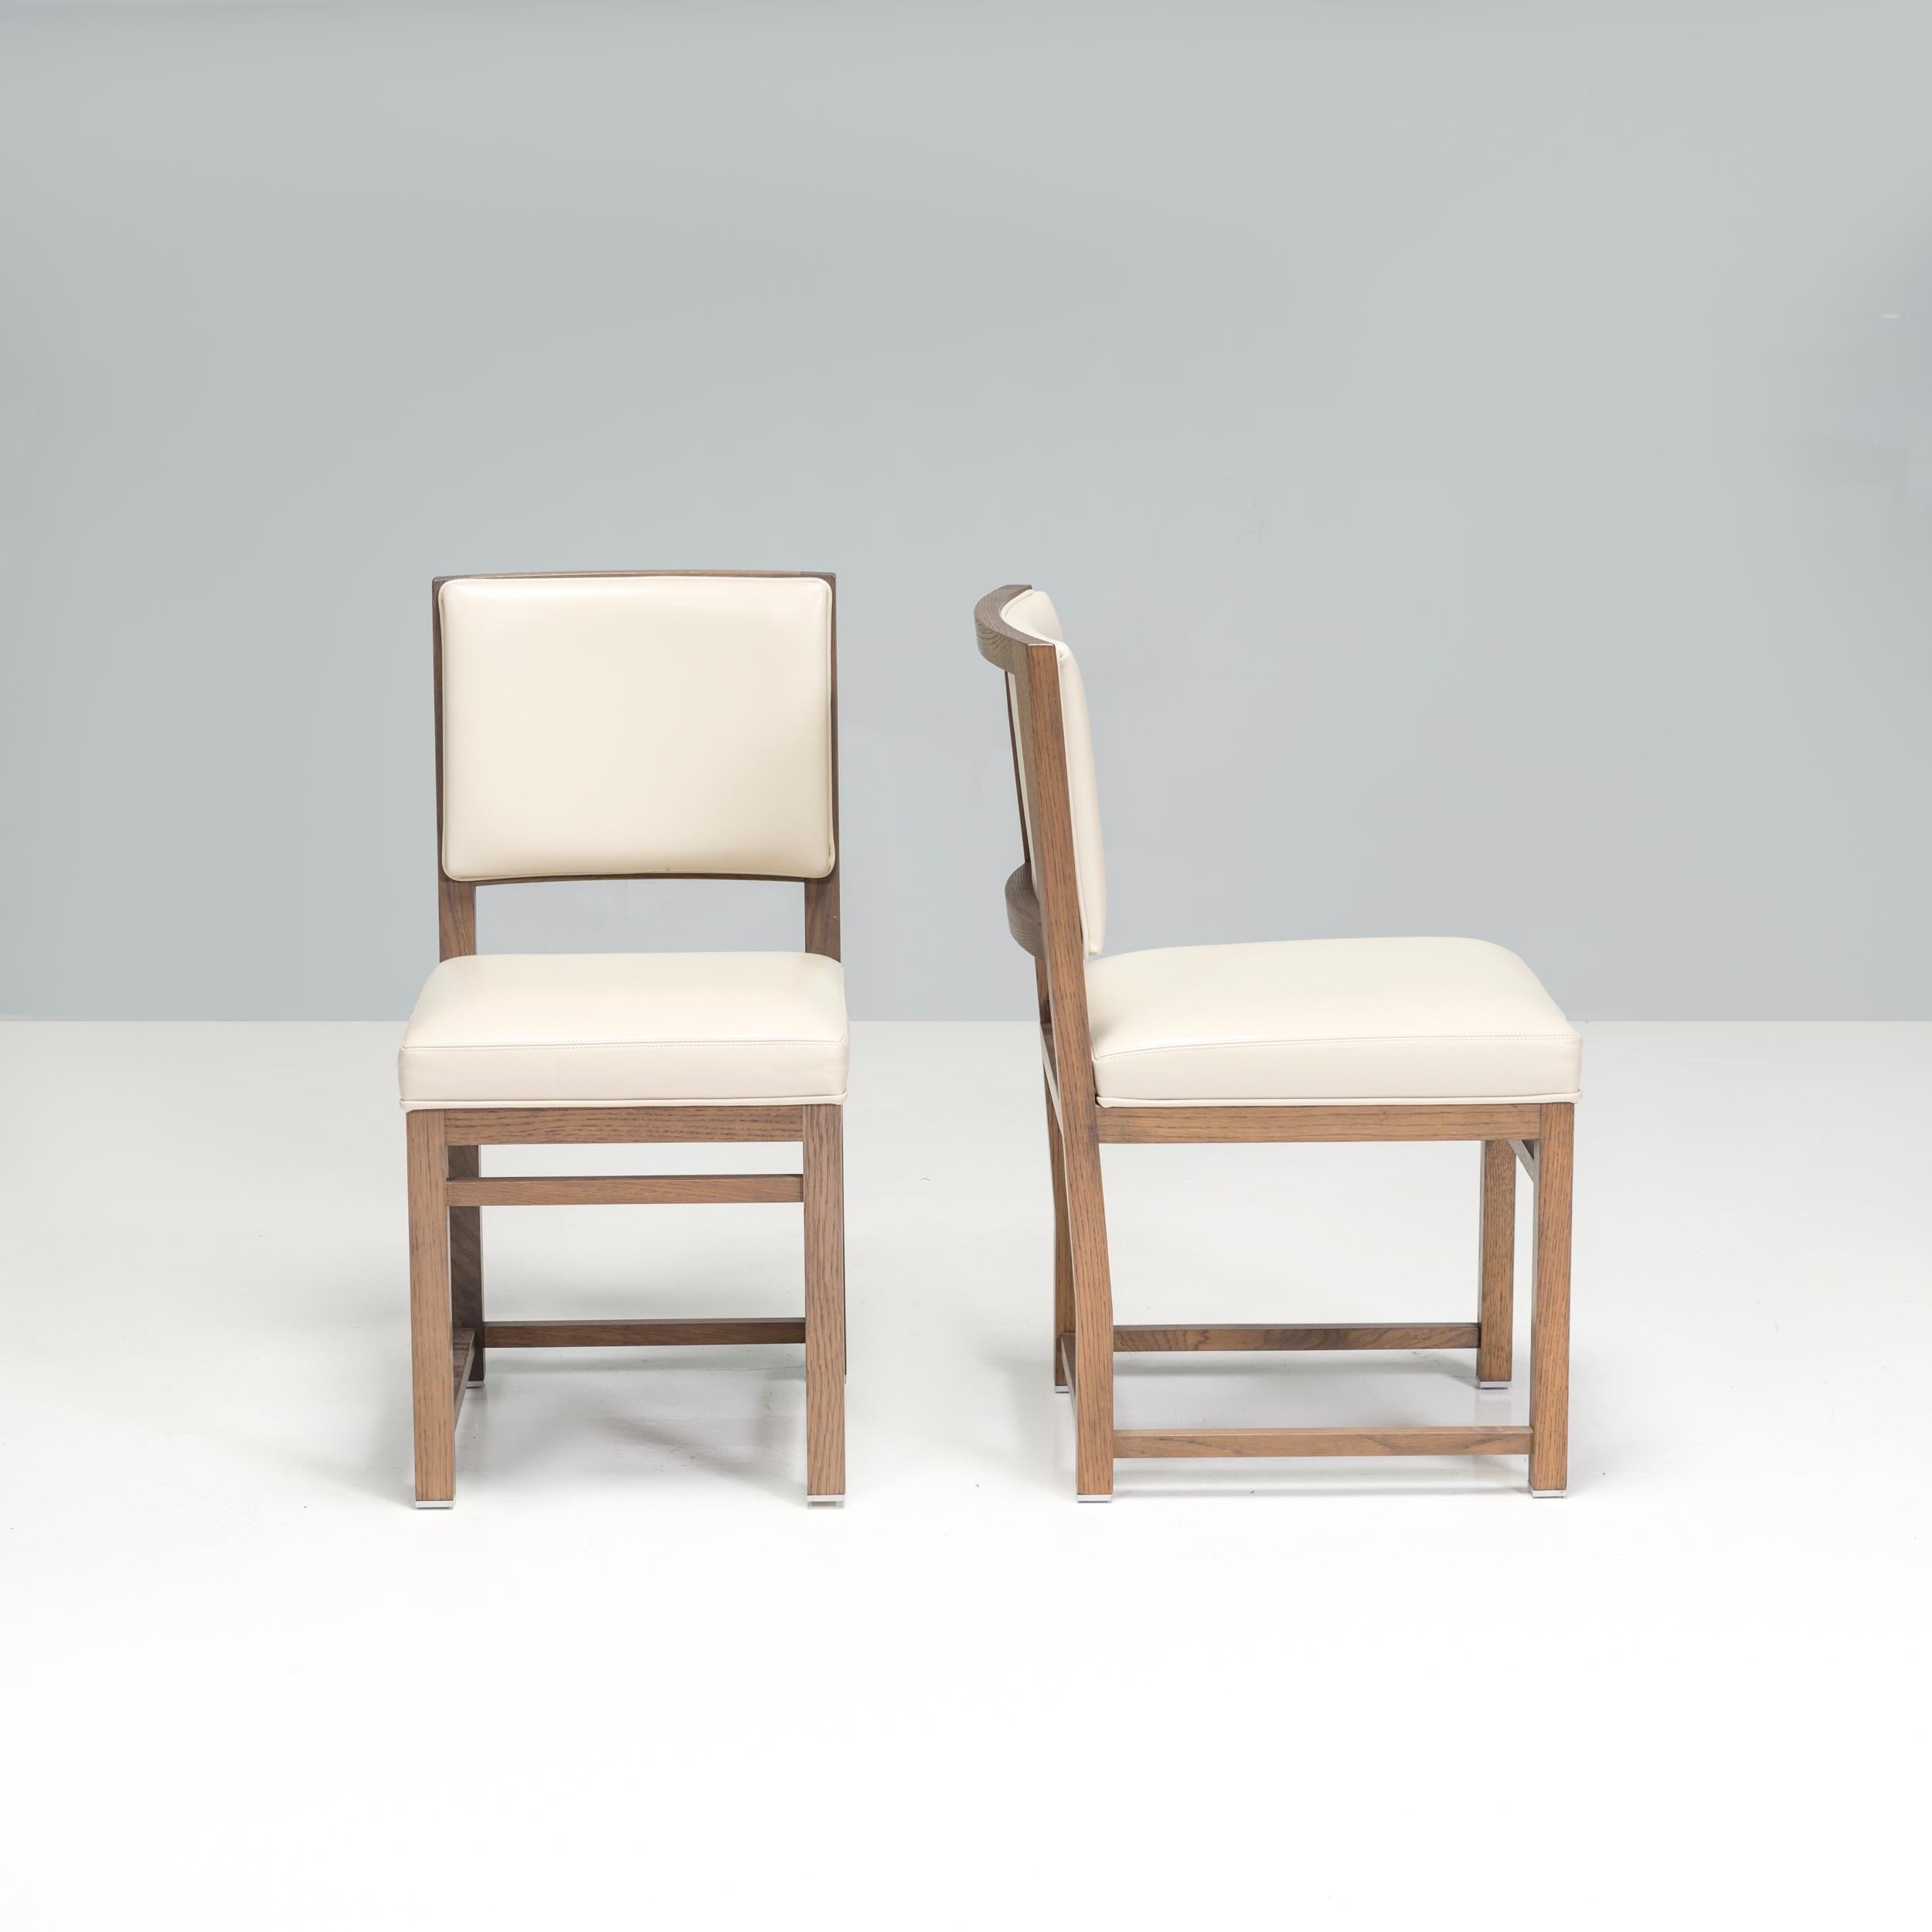 Originally designed by Antonio Citterio in 2008 for his Maxalto Simplice Collection, the Musa dining chair is a fantastic example of contemporary Italian design.

Constructed from a grey oak frame, the angular chairs have sled style legs and a